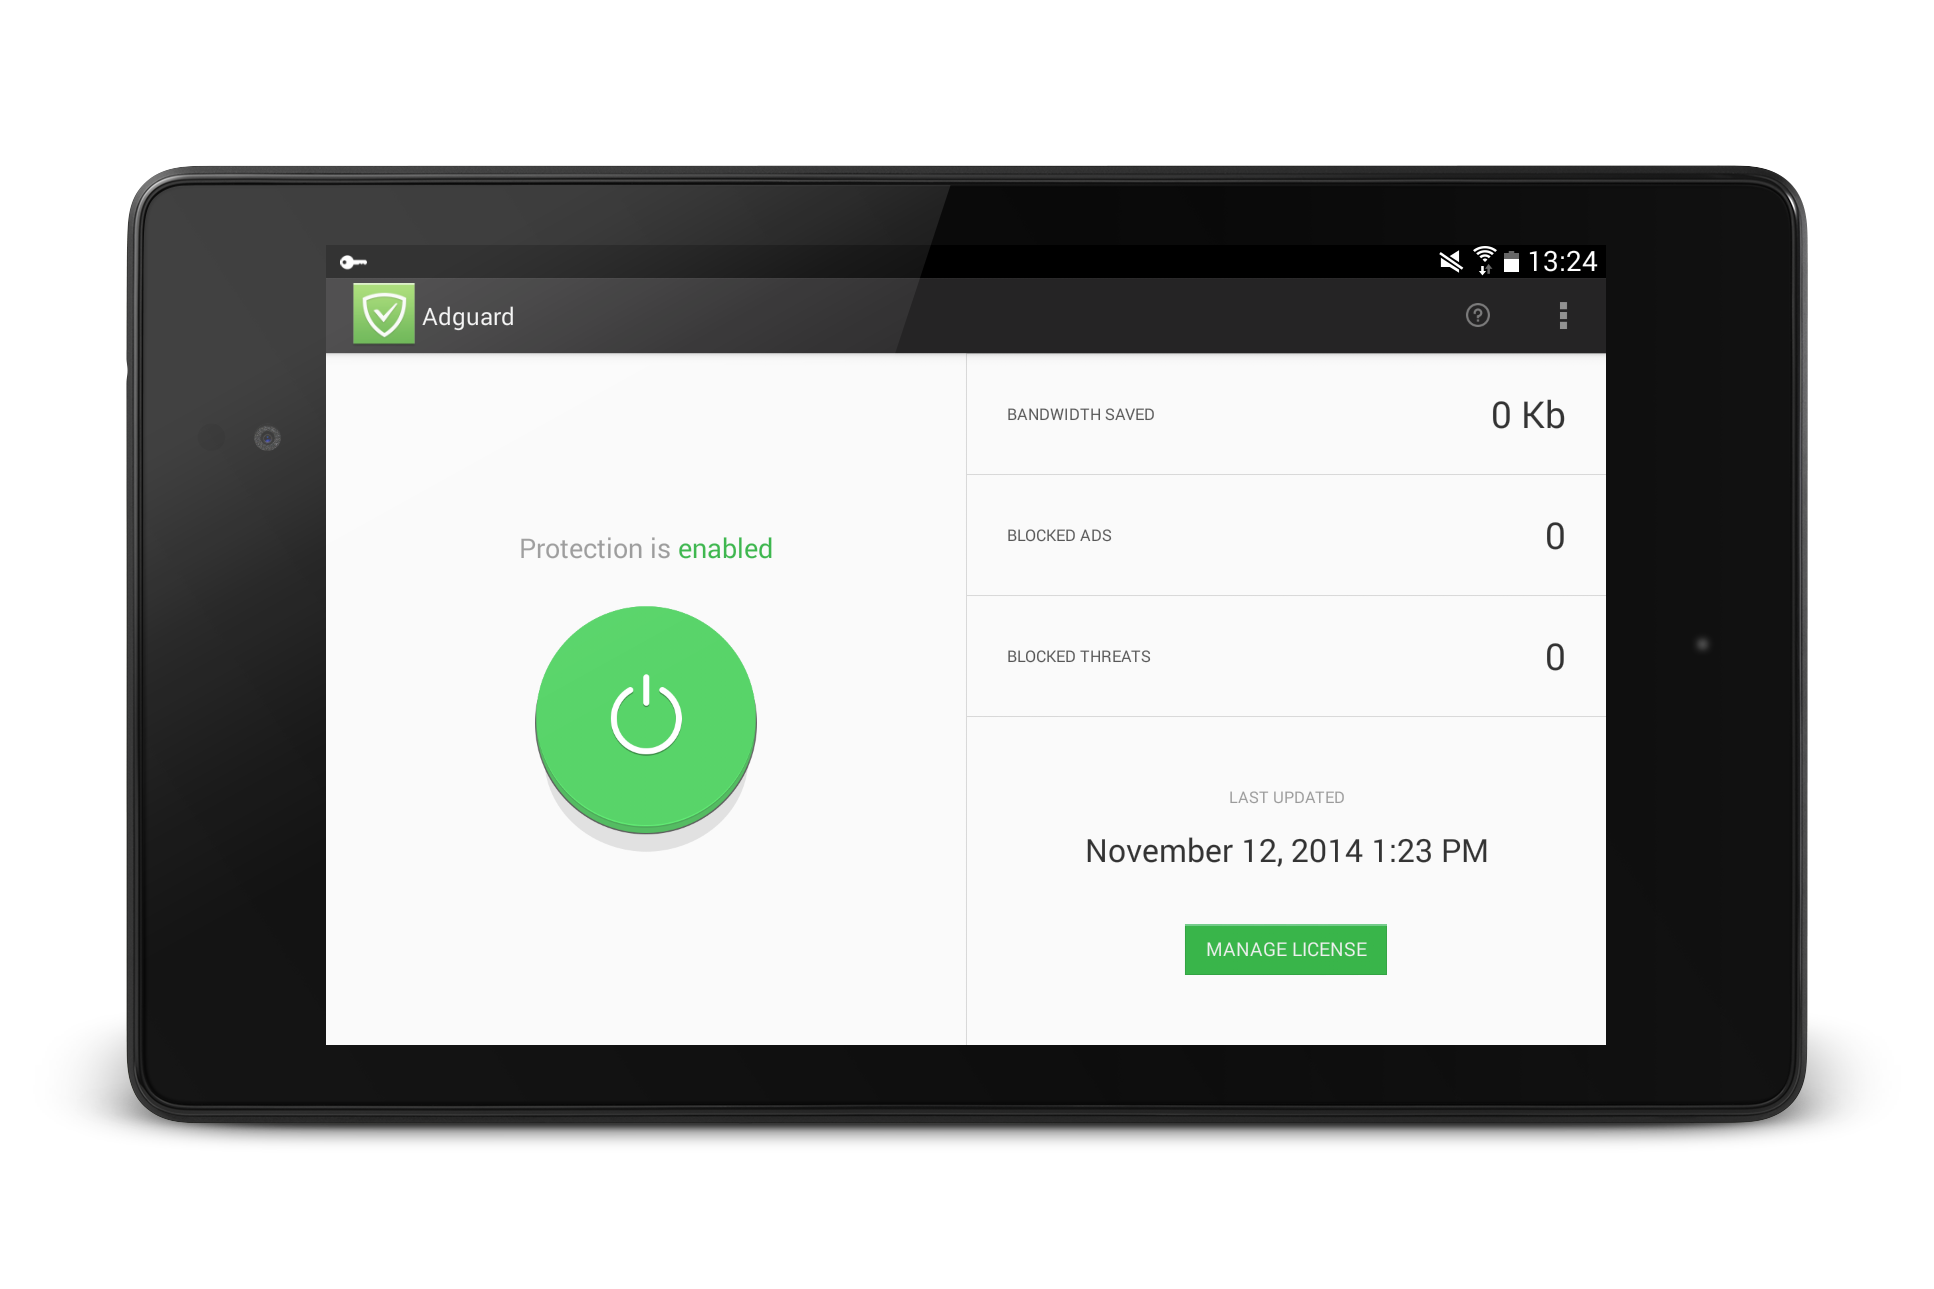 11/13/2014 - Adguard app for Android